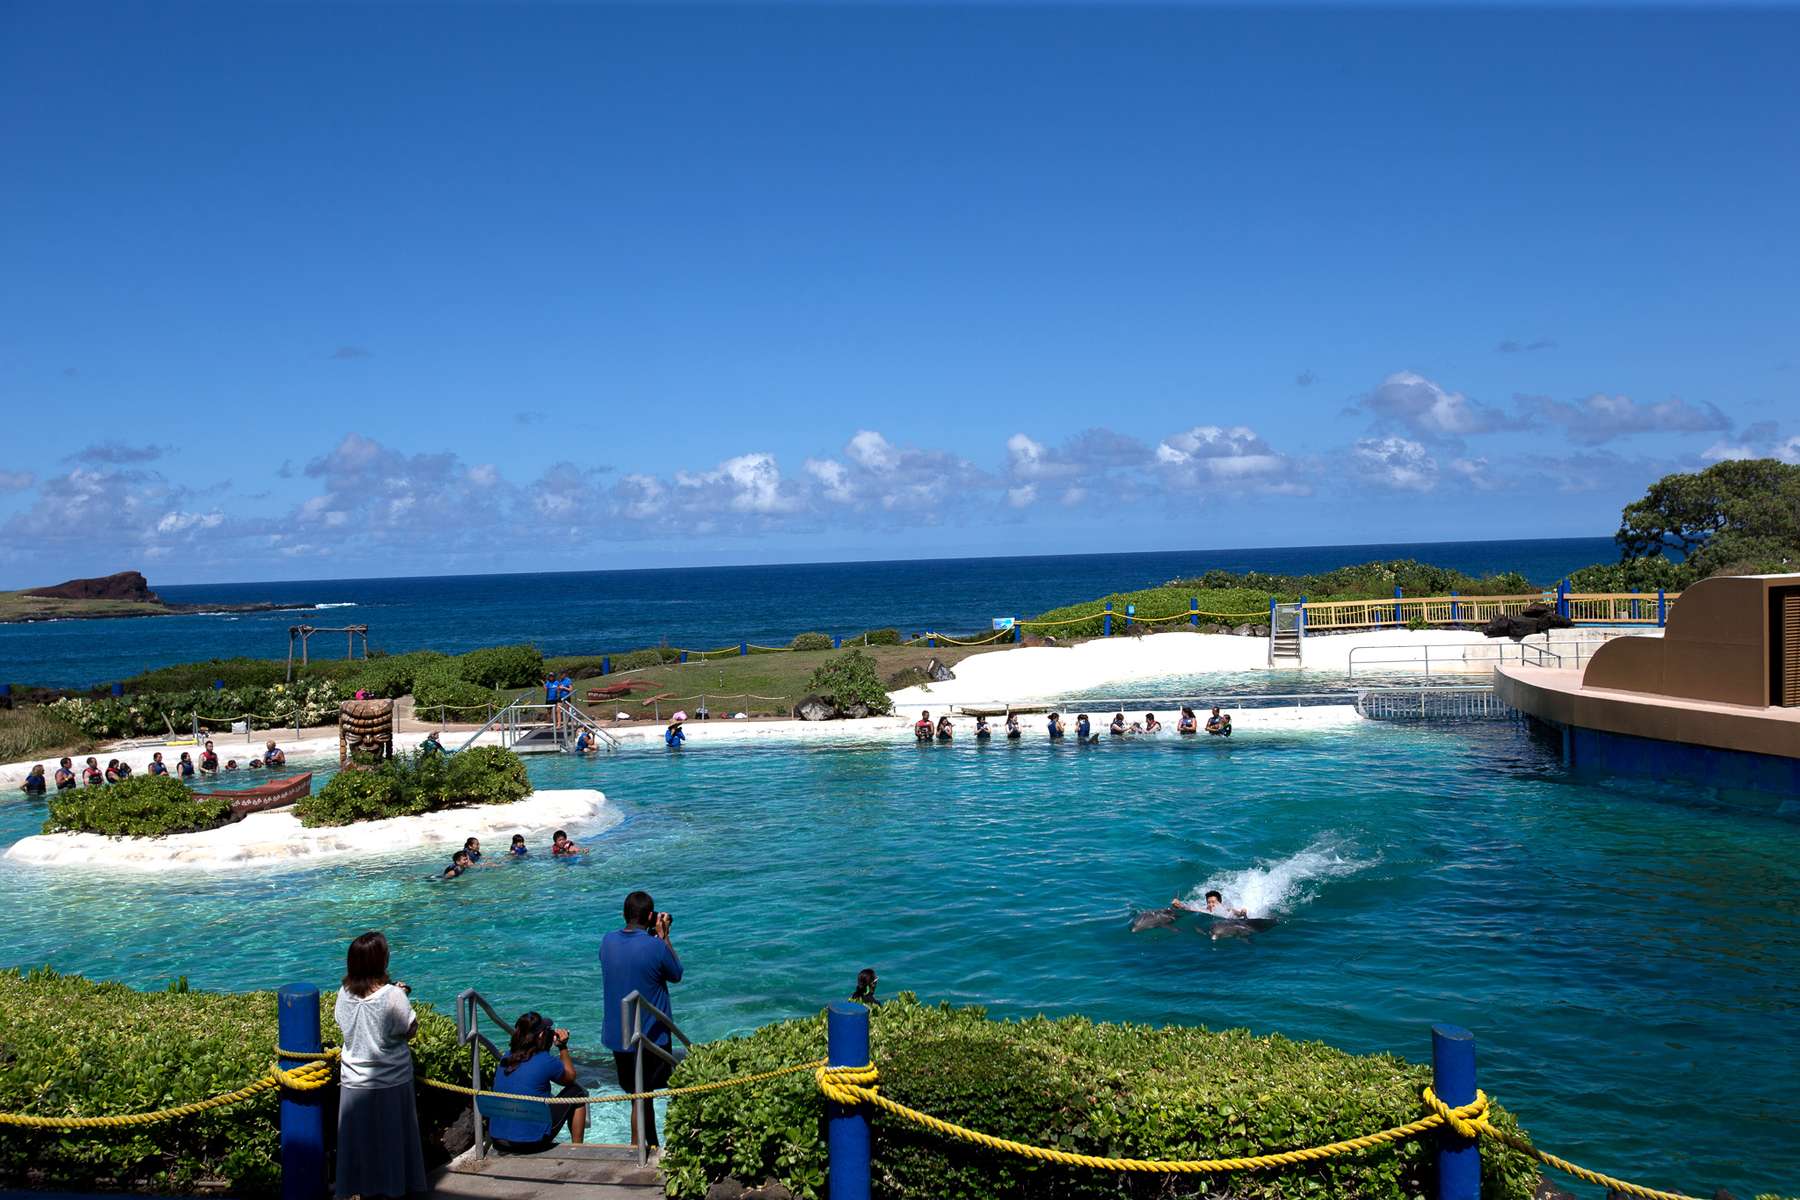 Patrons swim with dolphins at Sea Life Park in Waimanalo, HI. Just beyond their tanks is Waimanale Bay and the Pacific Ocean. (photo © Karen Ducey)